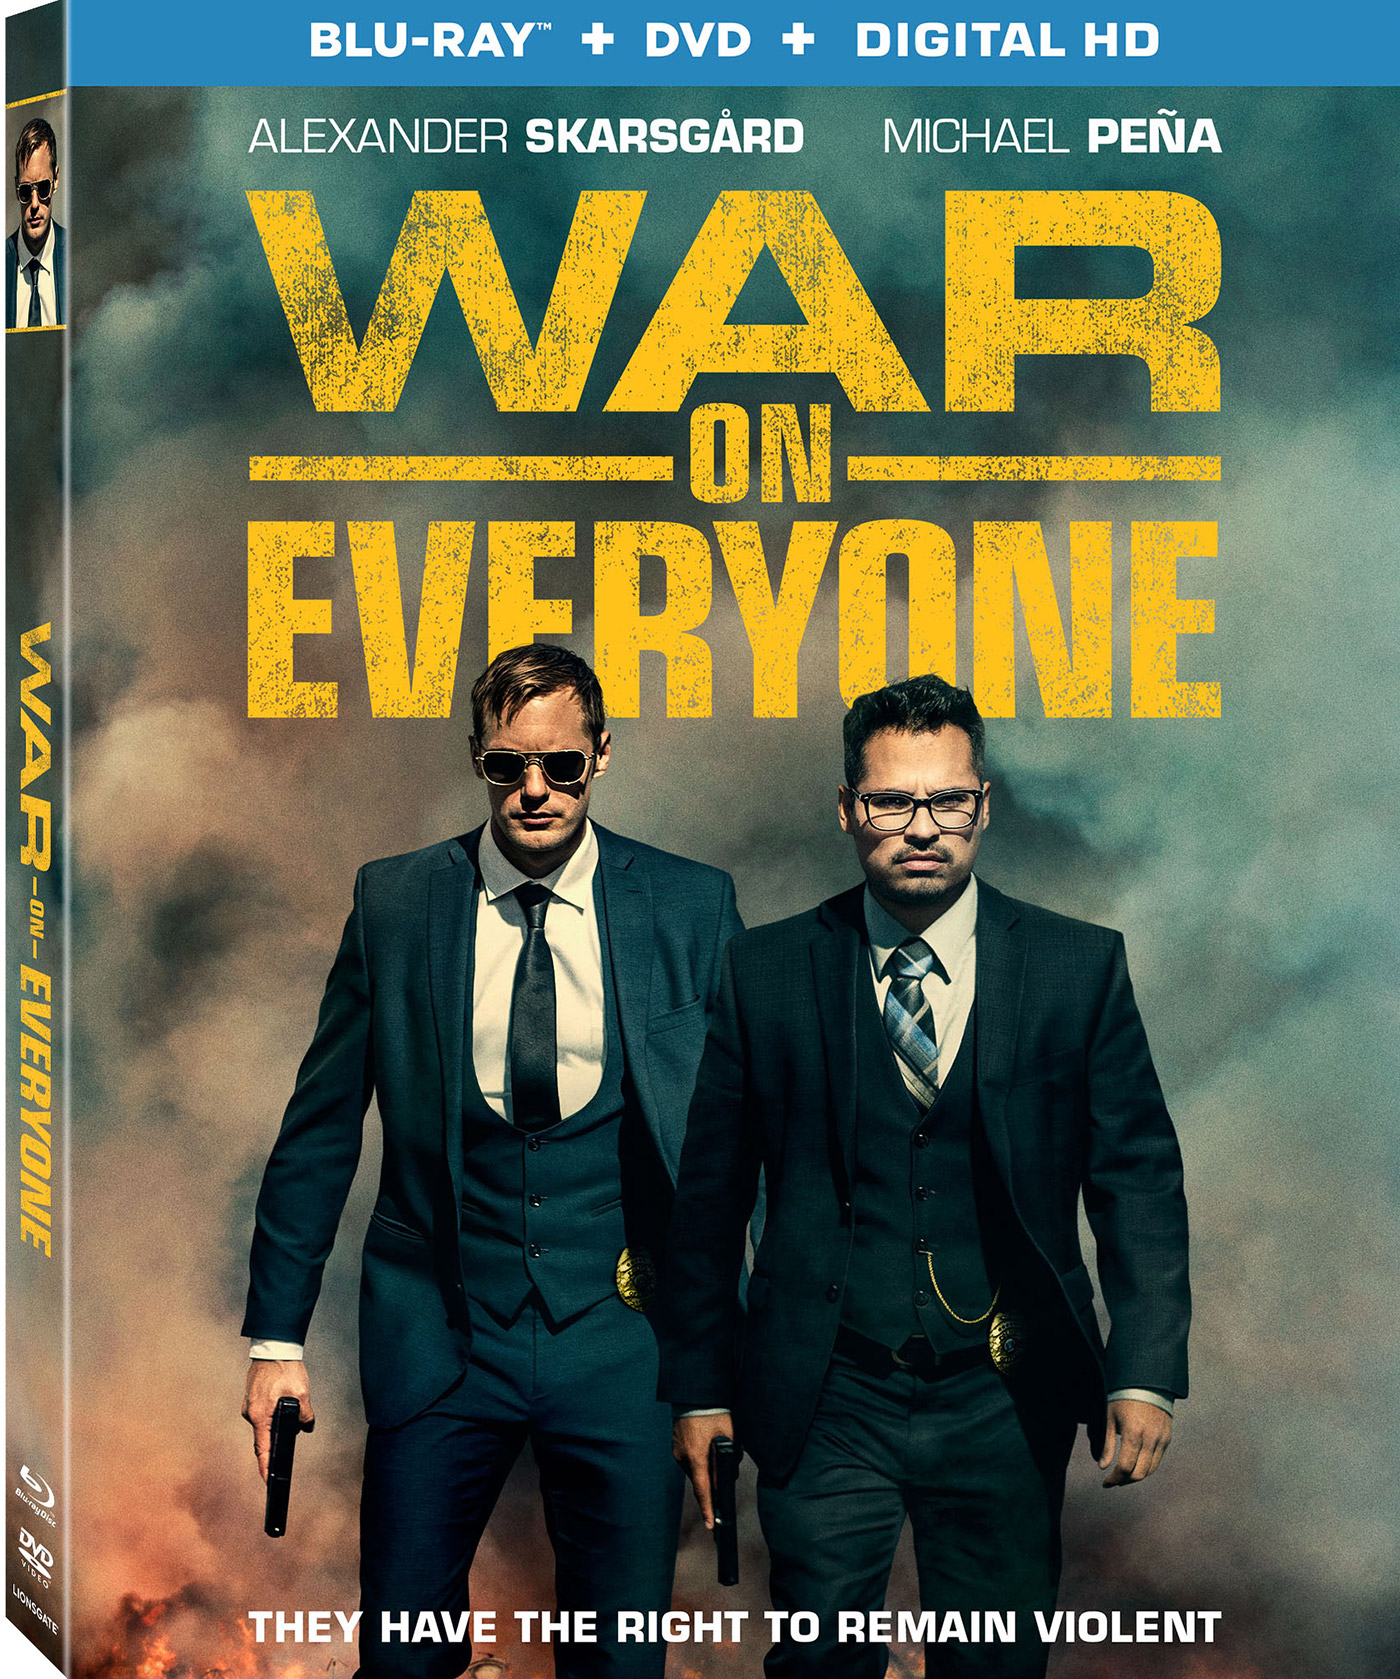 war on everyone movie review